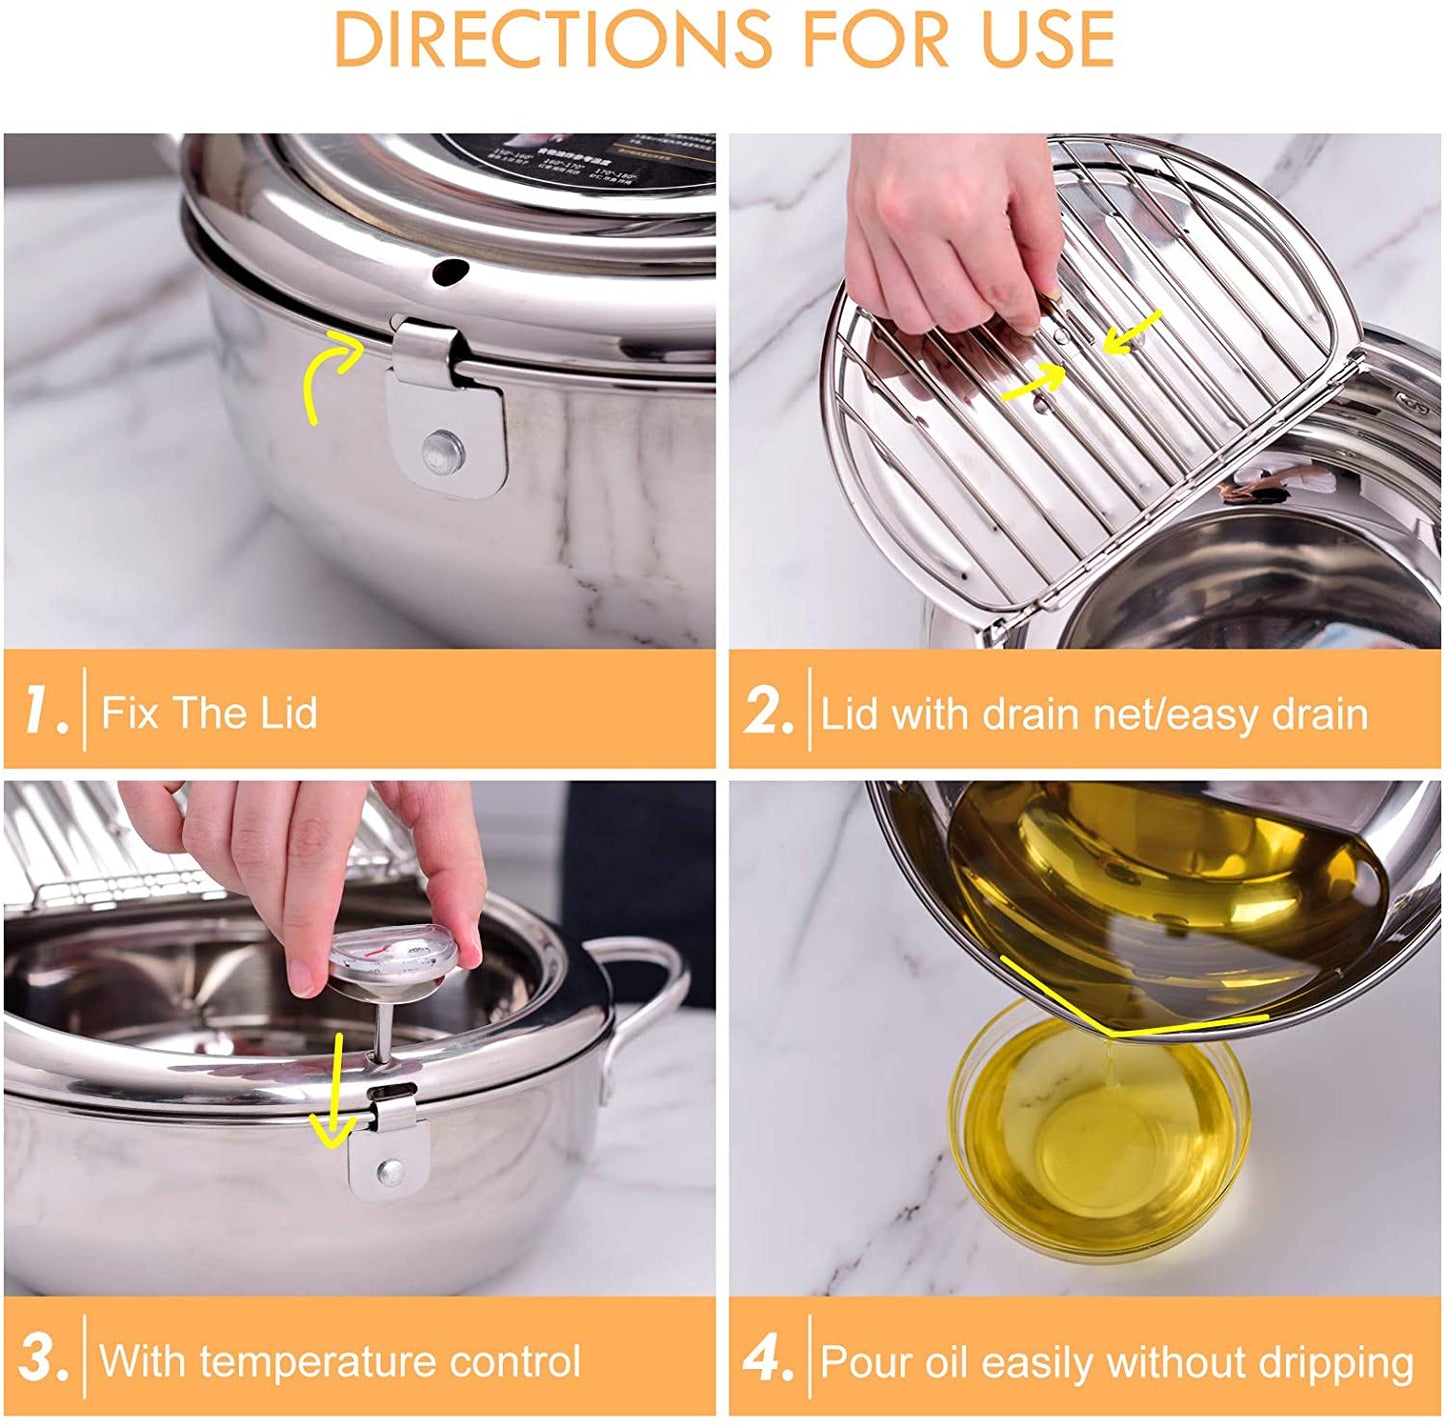 Japanese 304 Stainless Steel Deep Frying Pot with Thermometer and Lid